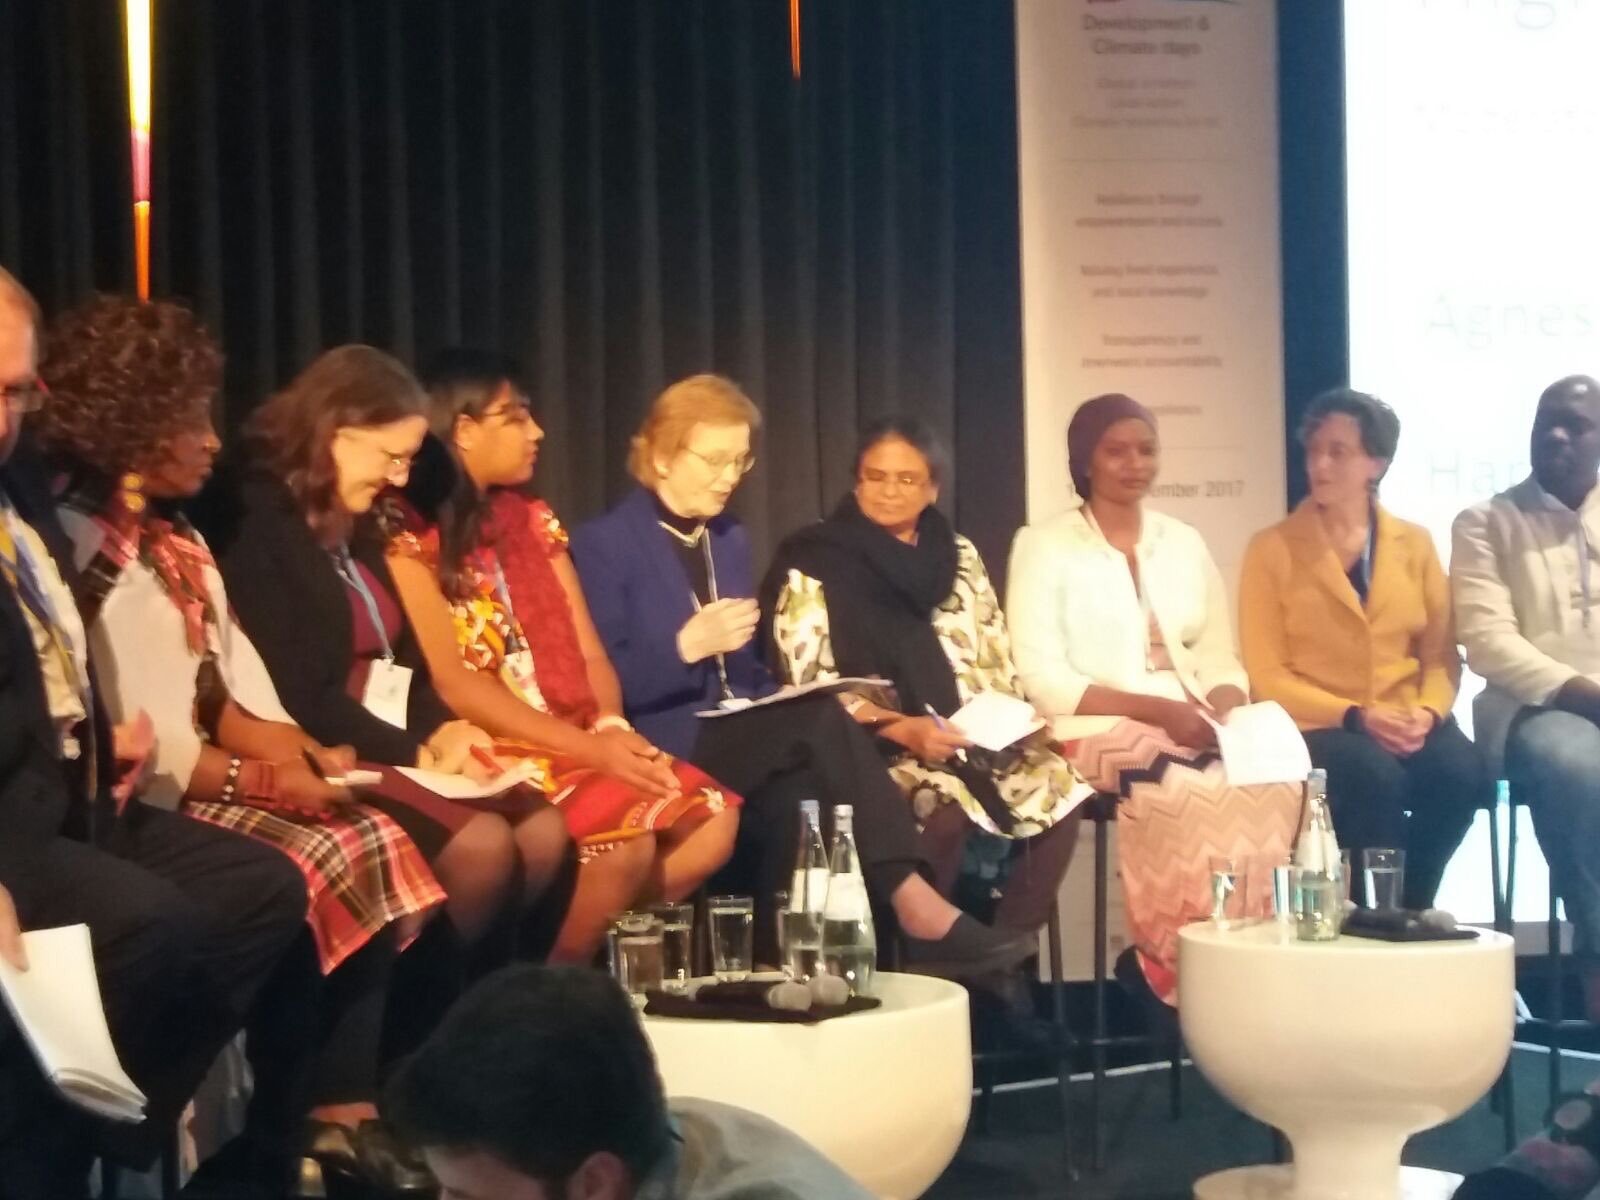 With Mary Robinson, @m_winthrop emphasises huge importance of indigenous local knowledge in climate policy and programming #DCdays17 #cop23 https://t.co/1w4WeRAeJ2